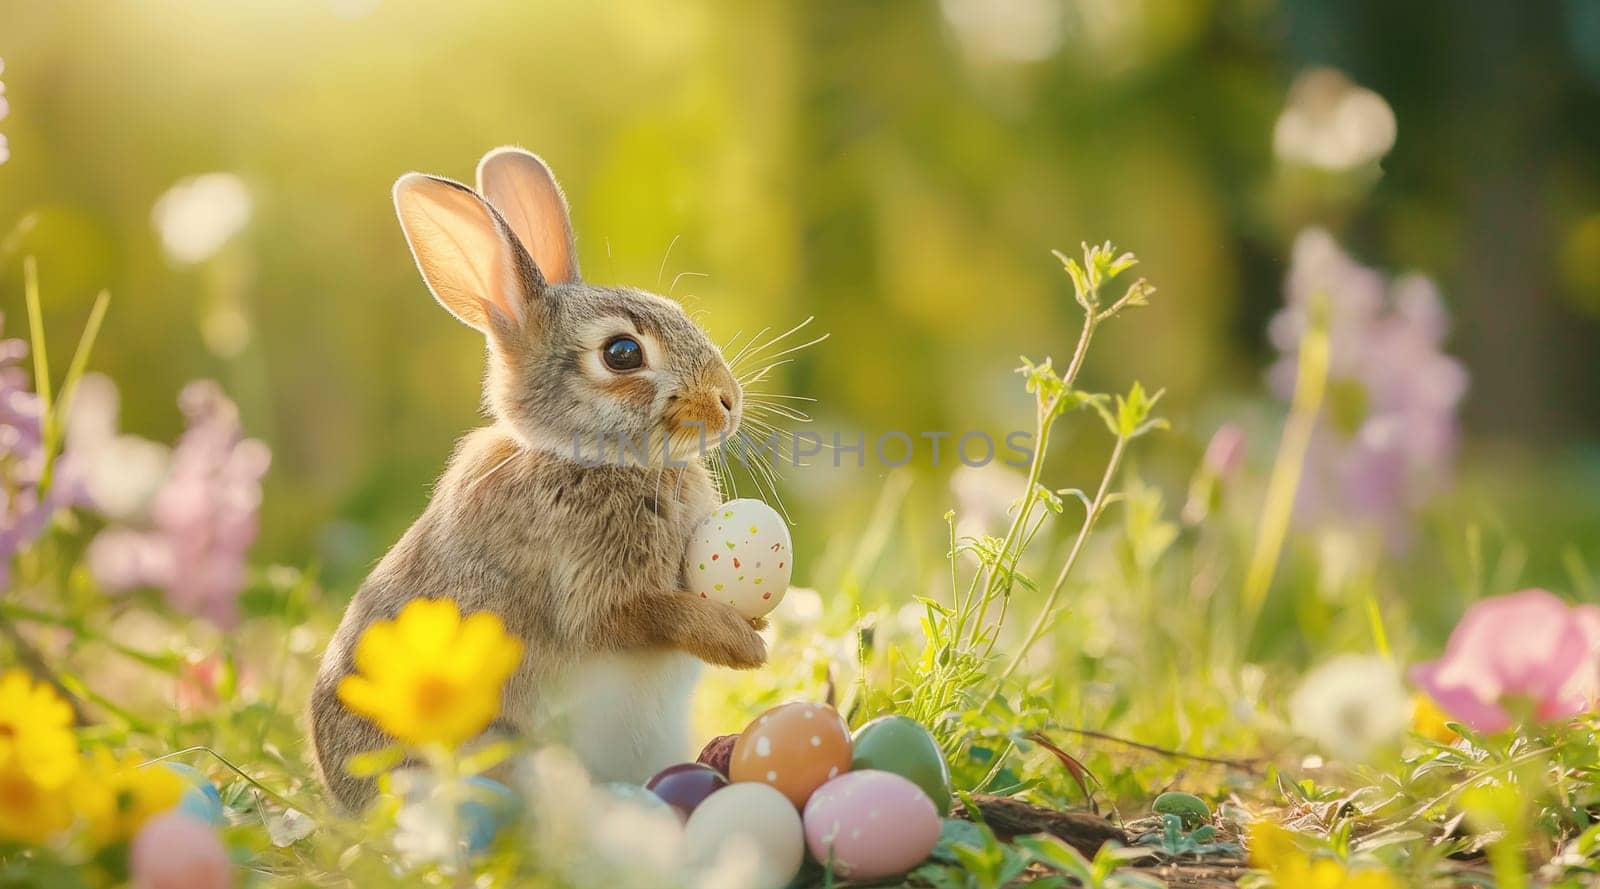 A serene rabbit amidst daisies and Easter eggs in a sunlit spring meadow. High quality photo